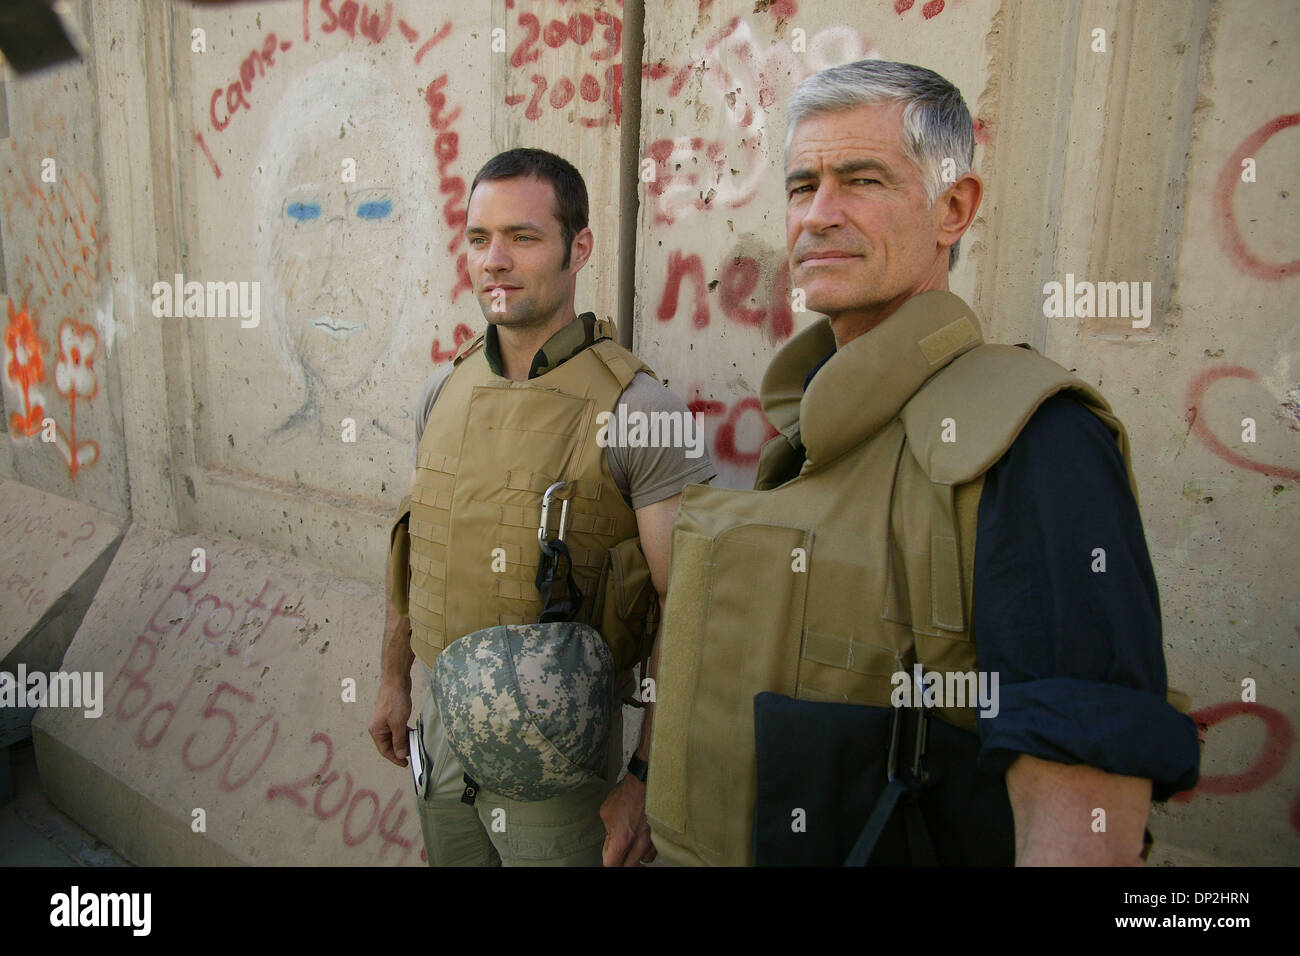 Jun 05, 2006; Baghdad, IRAQ; National Geographic staff writer NEIL SHEA (L) and photographer JAMES NACHTWEY (R) while on assignment together for National Geographic in Baghdad June 5 2006. Mandatory Credit: Photo by David Honl/ZUMA Press. (©) Copyright 2006 by David Honl Stock Photo